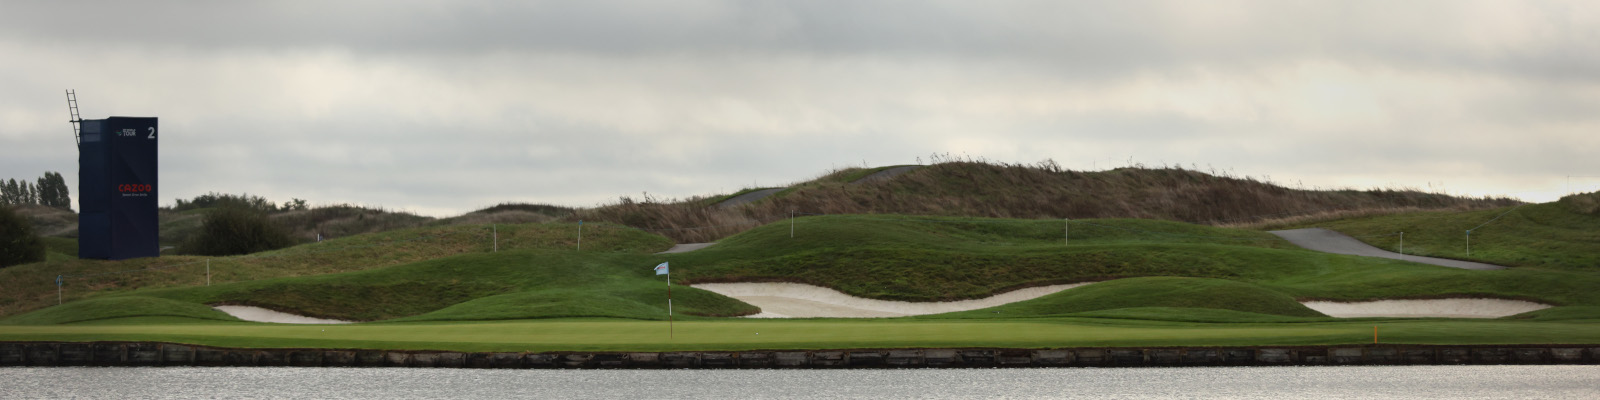 Le Golf National (Photo by Luke Walker/Getty Images)